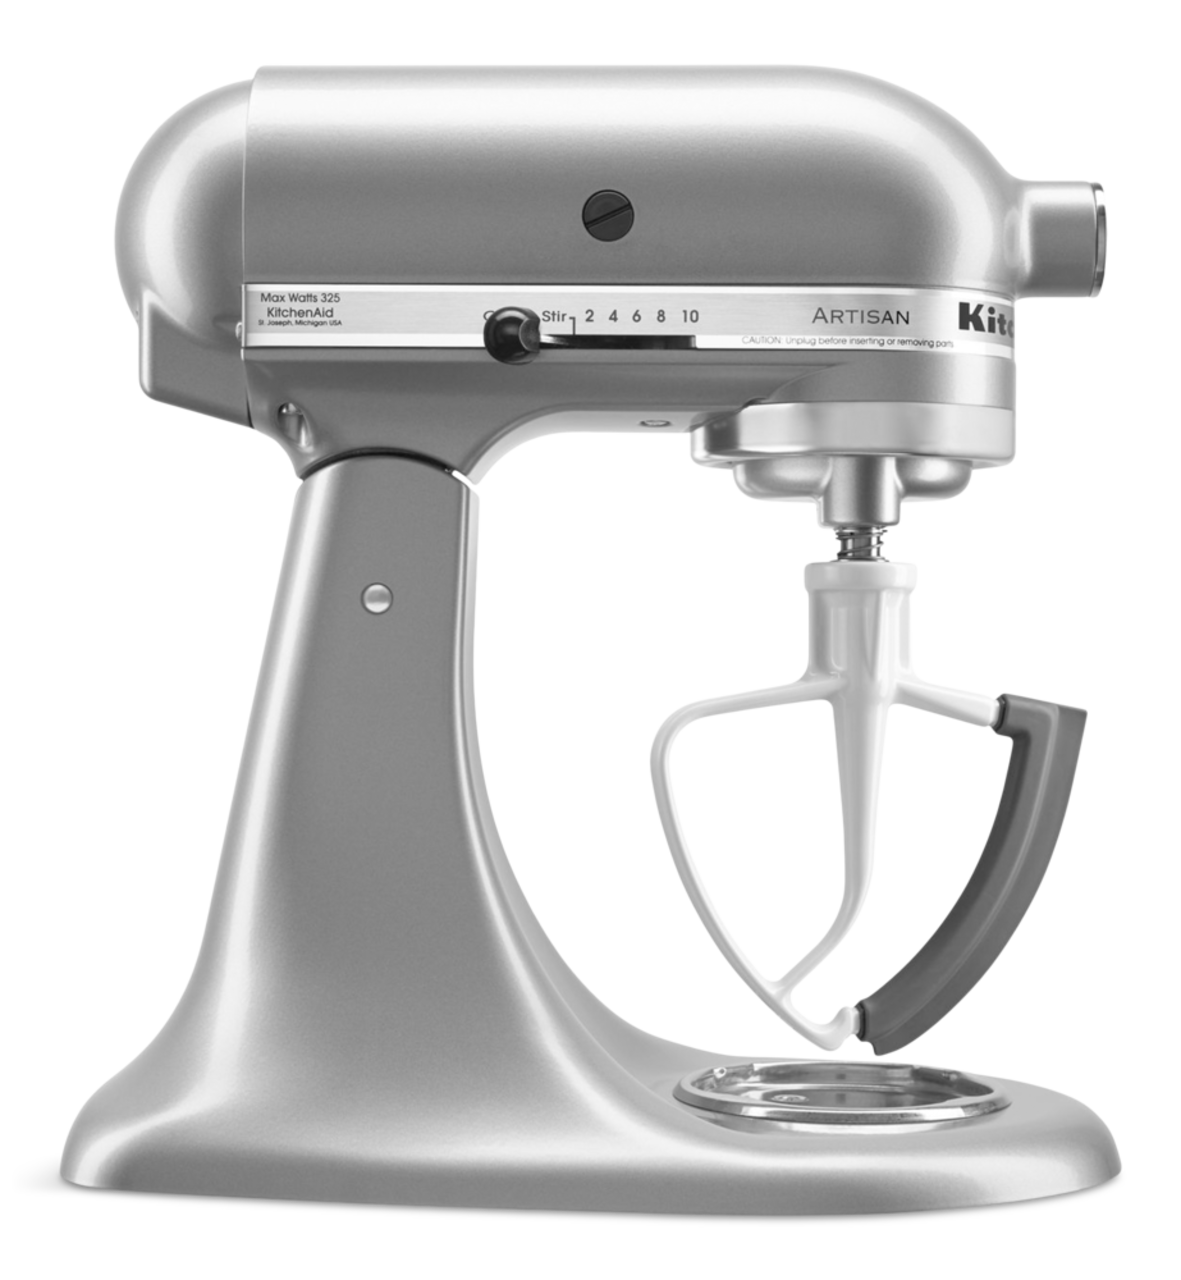 https://media-www.canadiantire.ca/product/living/kitchen/kitchen-appliances/0430676/kitchen-aid-flex-edge-beater-5-5-qrt-6-qrt-bowl-lift-f56c5452-e4ec-4b89-bb5c-21d8c842bd23.png?imdensity=1&imwidth=640&impolicy=mZoom